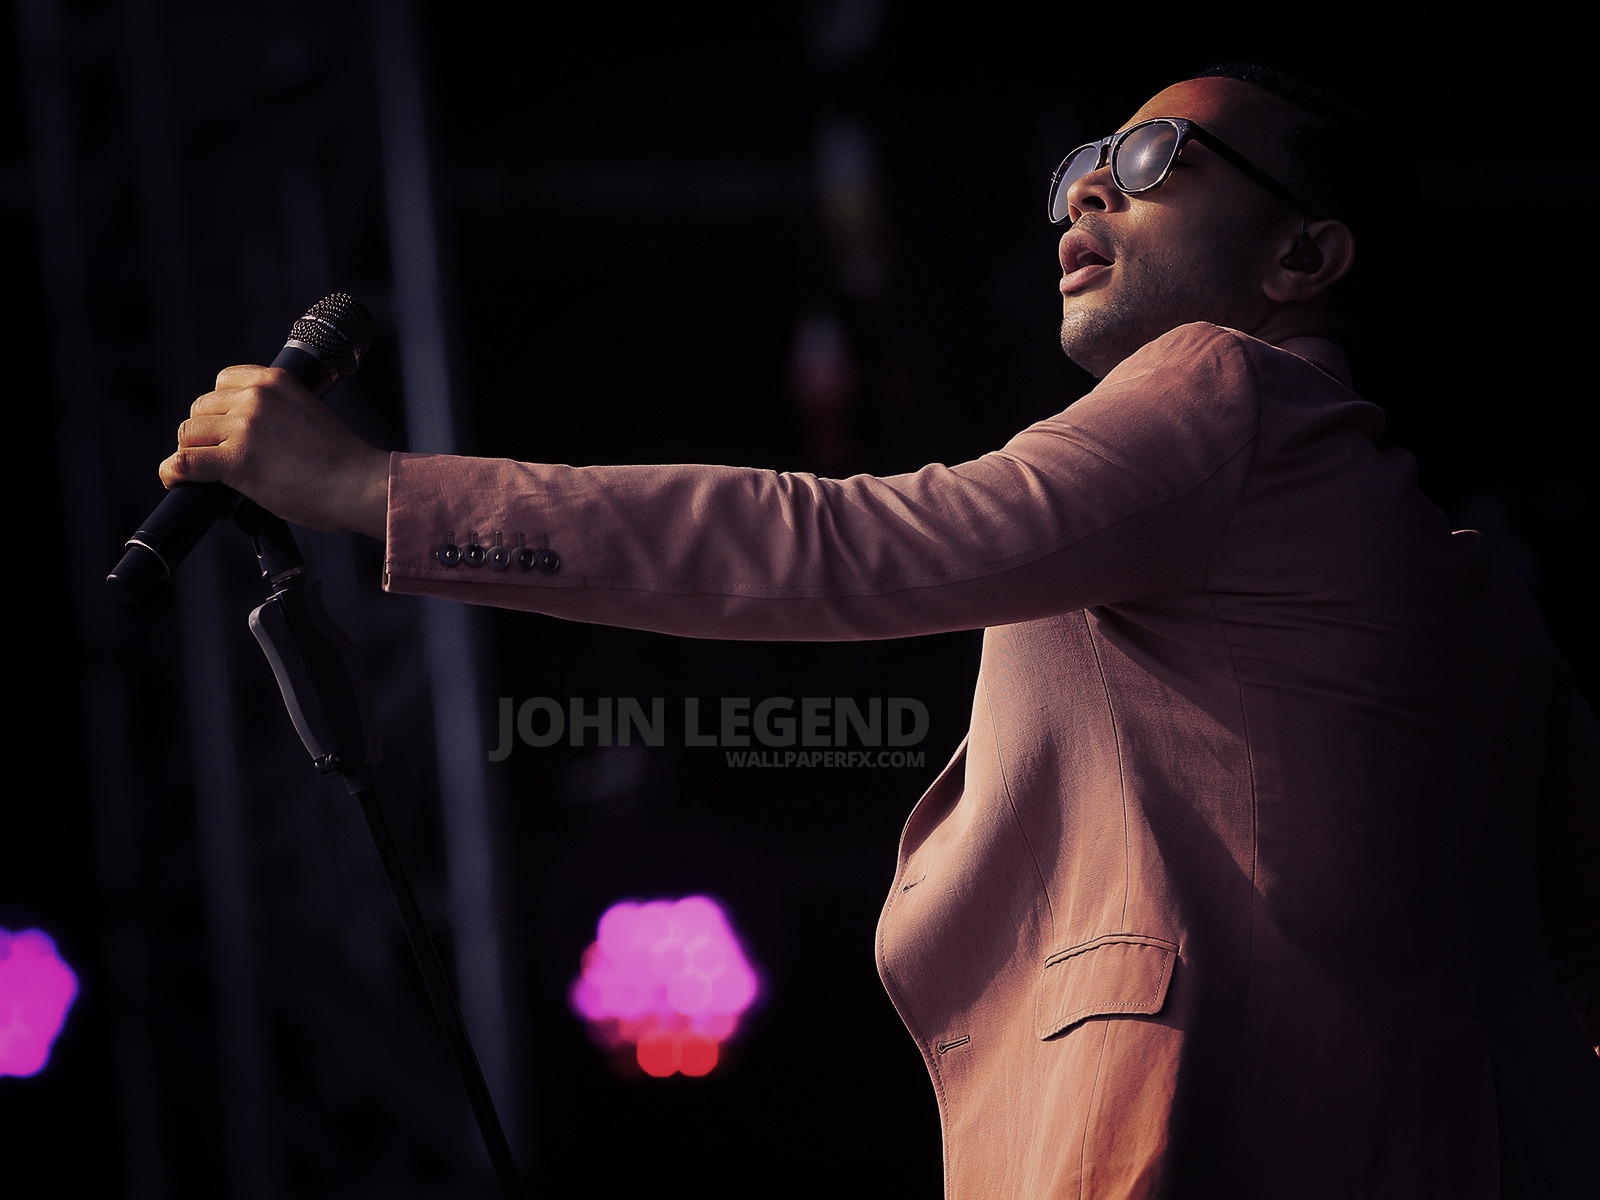 John Legend on Stage for 1600 x 1200 resolution